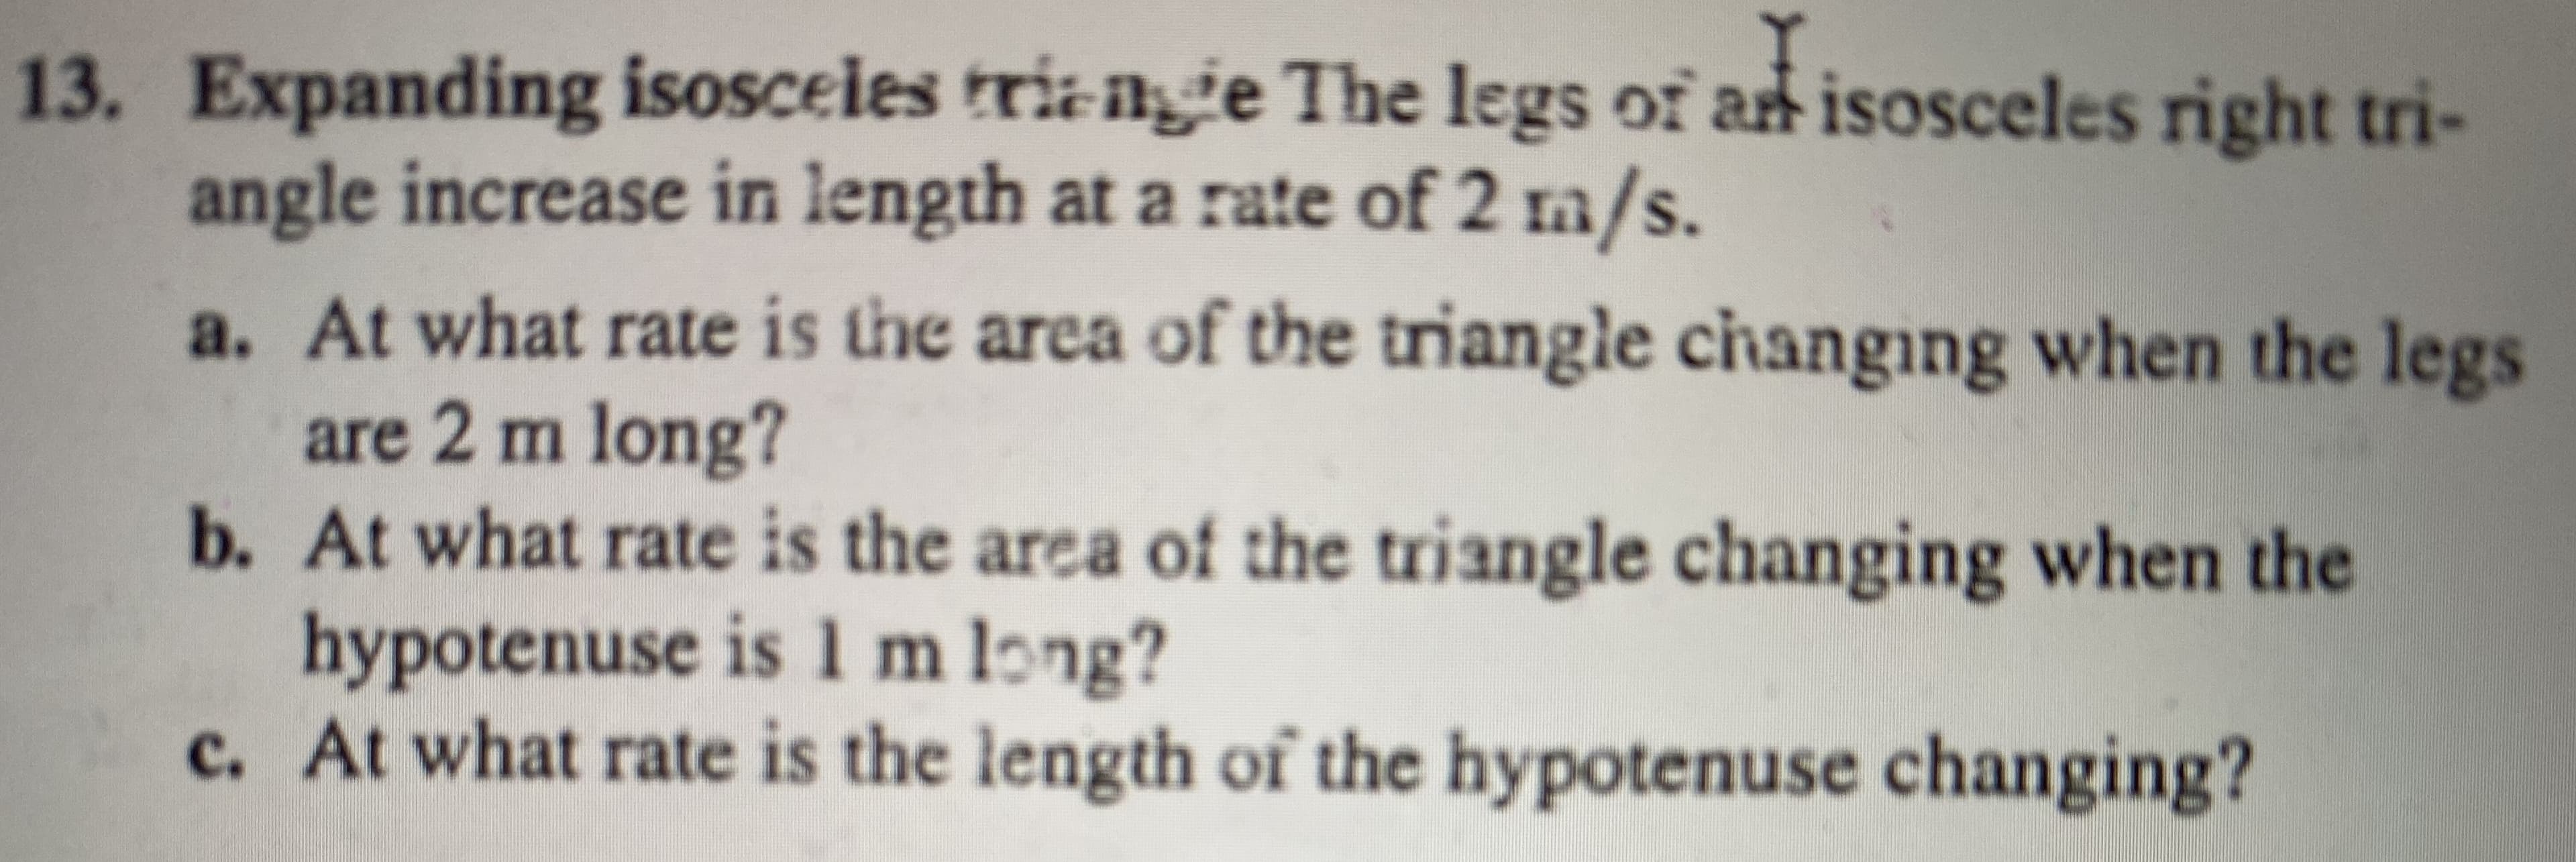 13. Expanding isosceles tri-igge The legs of art isosceles right tri-
angle increase in length at a rate of 2 m/s.
a. At what rate is the area of the triangle cihanging when the legs
are 2 m long?
b. At what rate is the area of the triangle changing when the
hypotenuse is 1 m long?
c. At what rate is the length of the hypotenuse changing?
